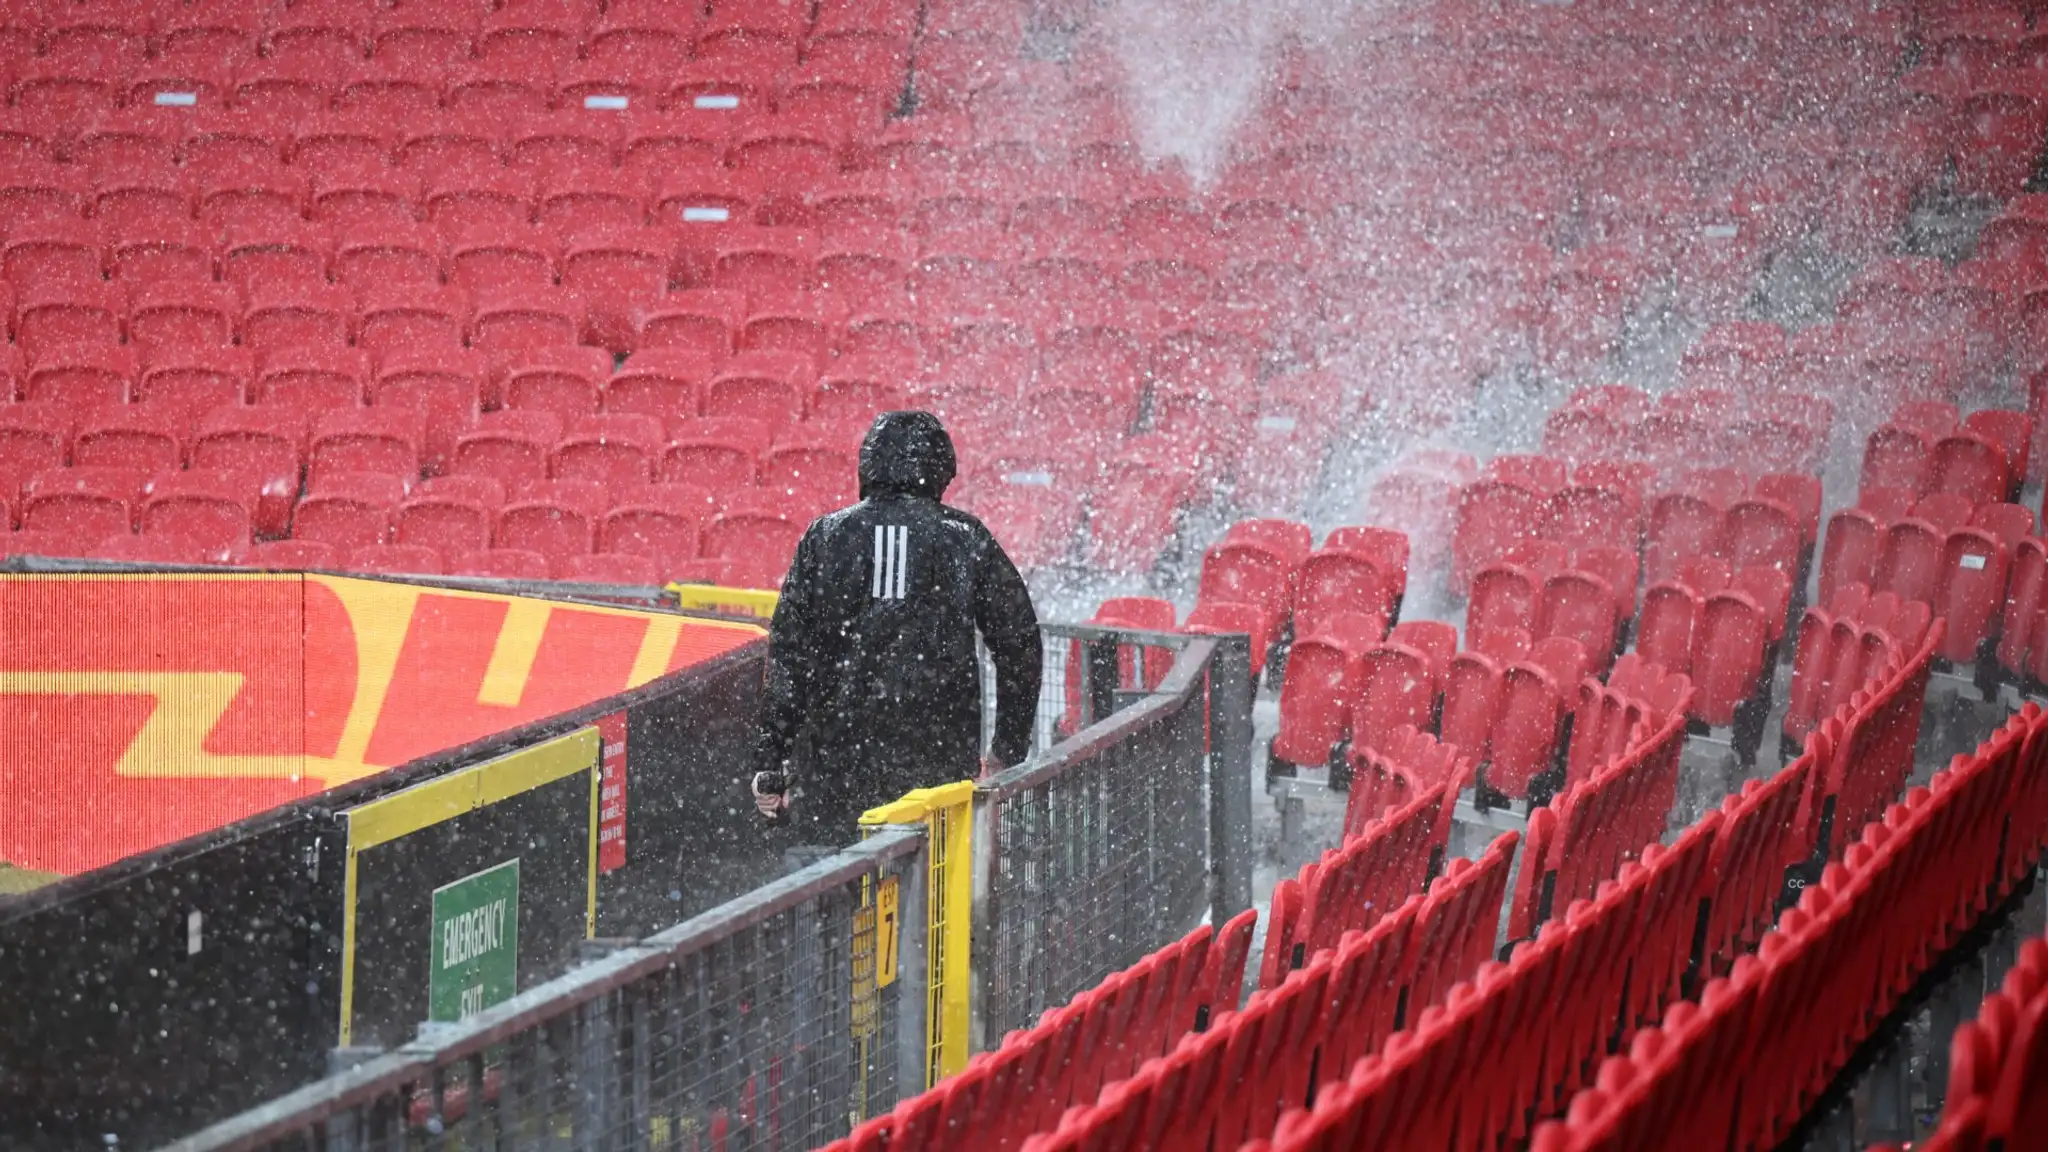 VIDEO: Old Trafford is flooded! Shocking video shows impact of downpour as bemused Manchester United fans watch water gush through stadium's roof